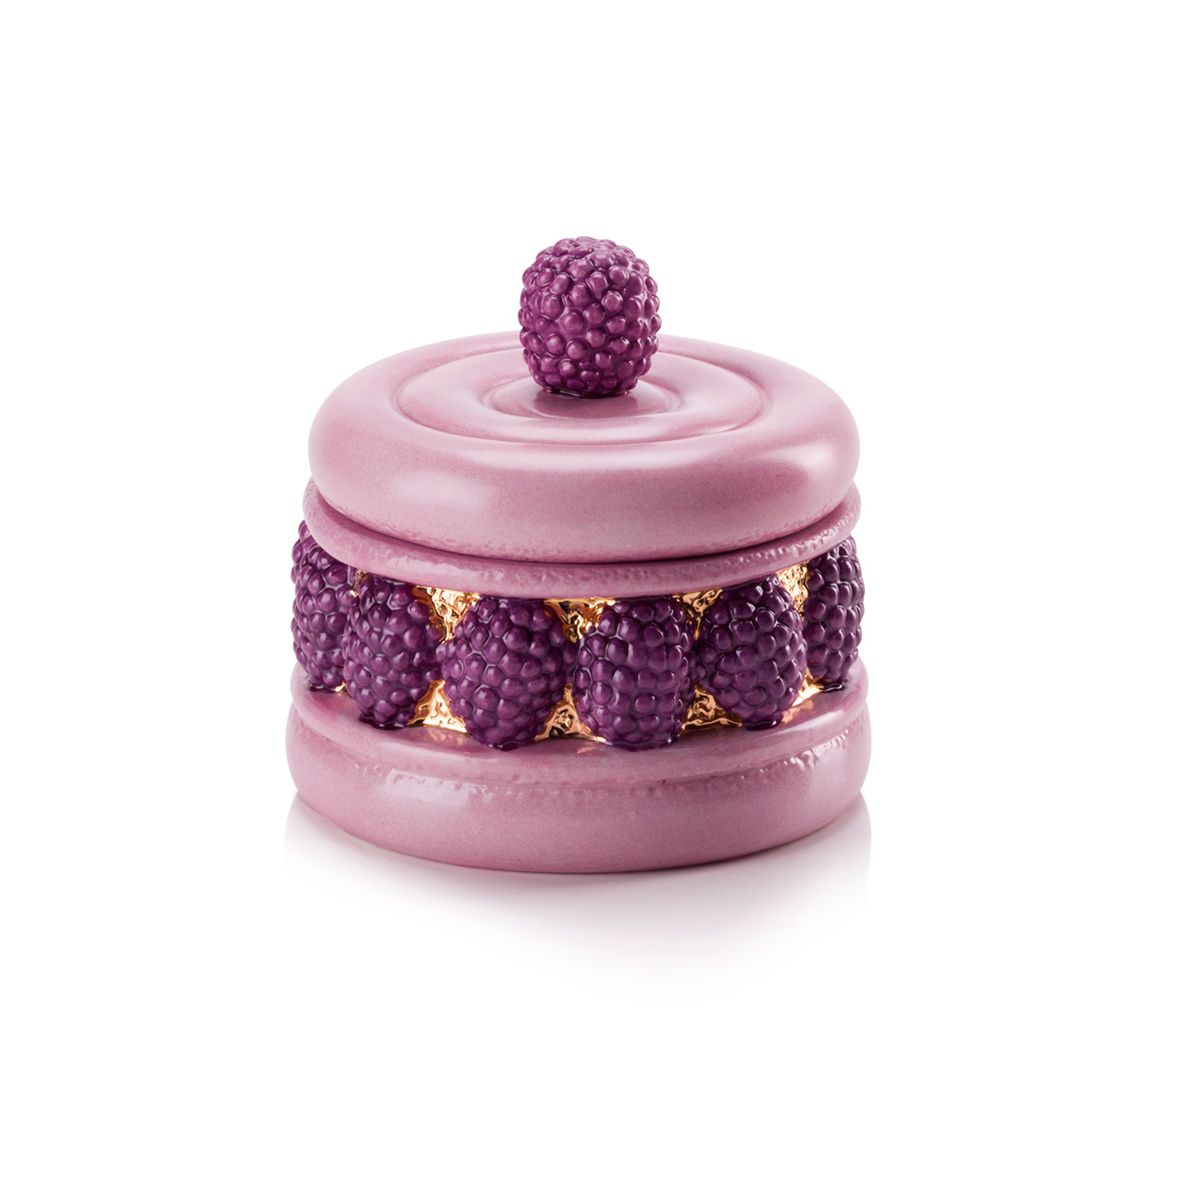 Chantilly Ispahan Cake Scented Candle - Lilac 